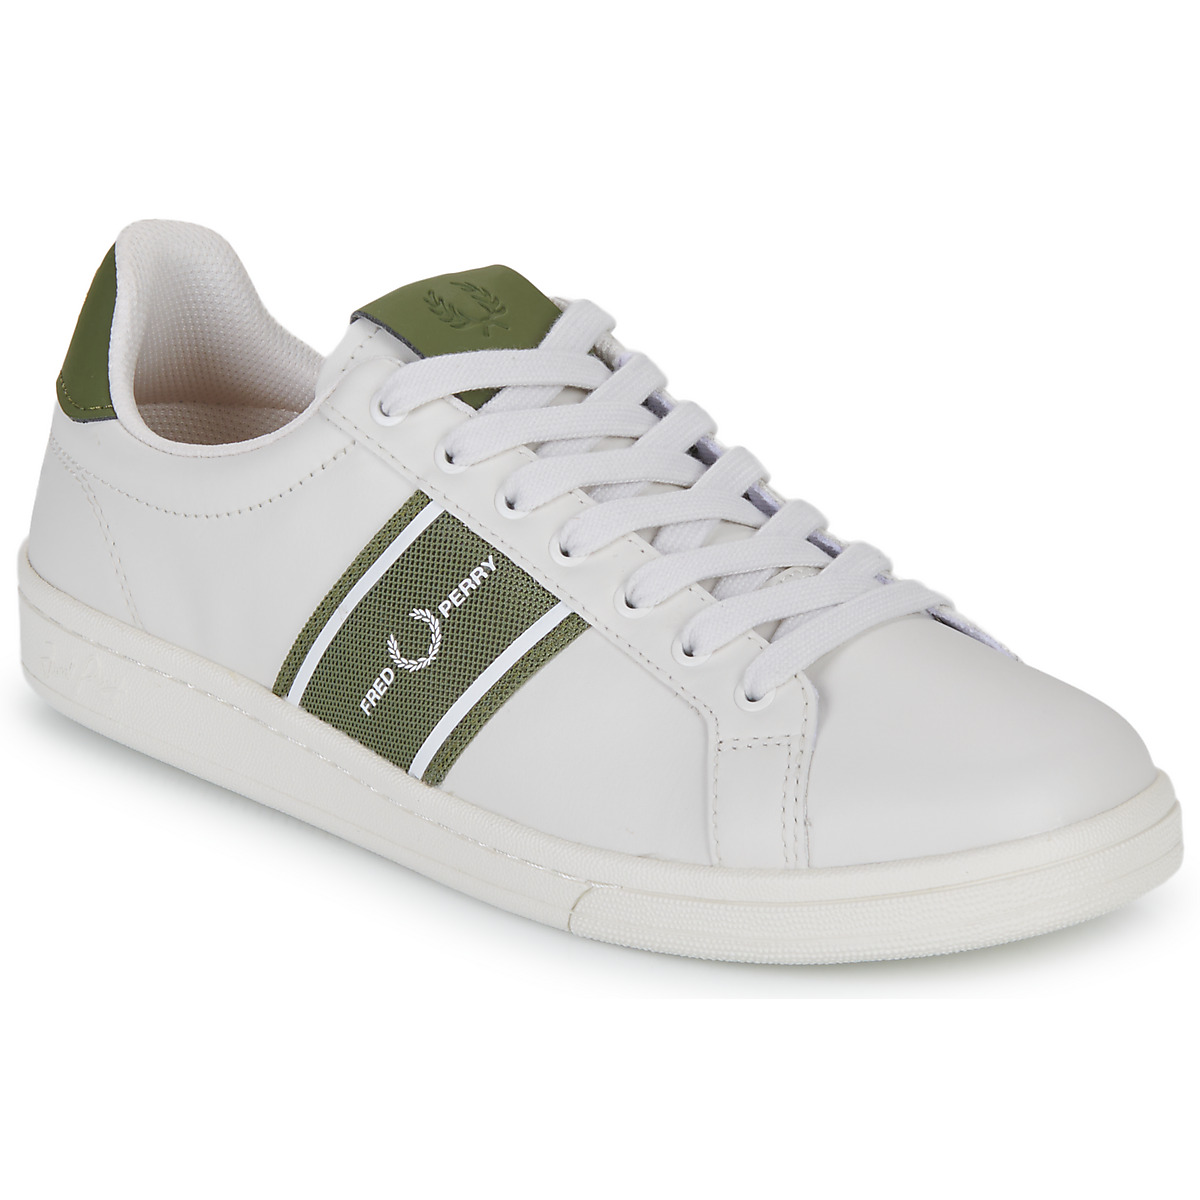 Fred Perry B721 Lea/graphic Brand Mesh Beige